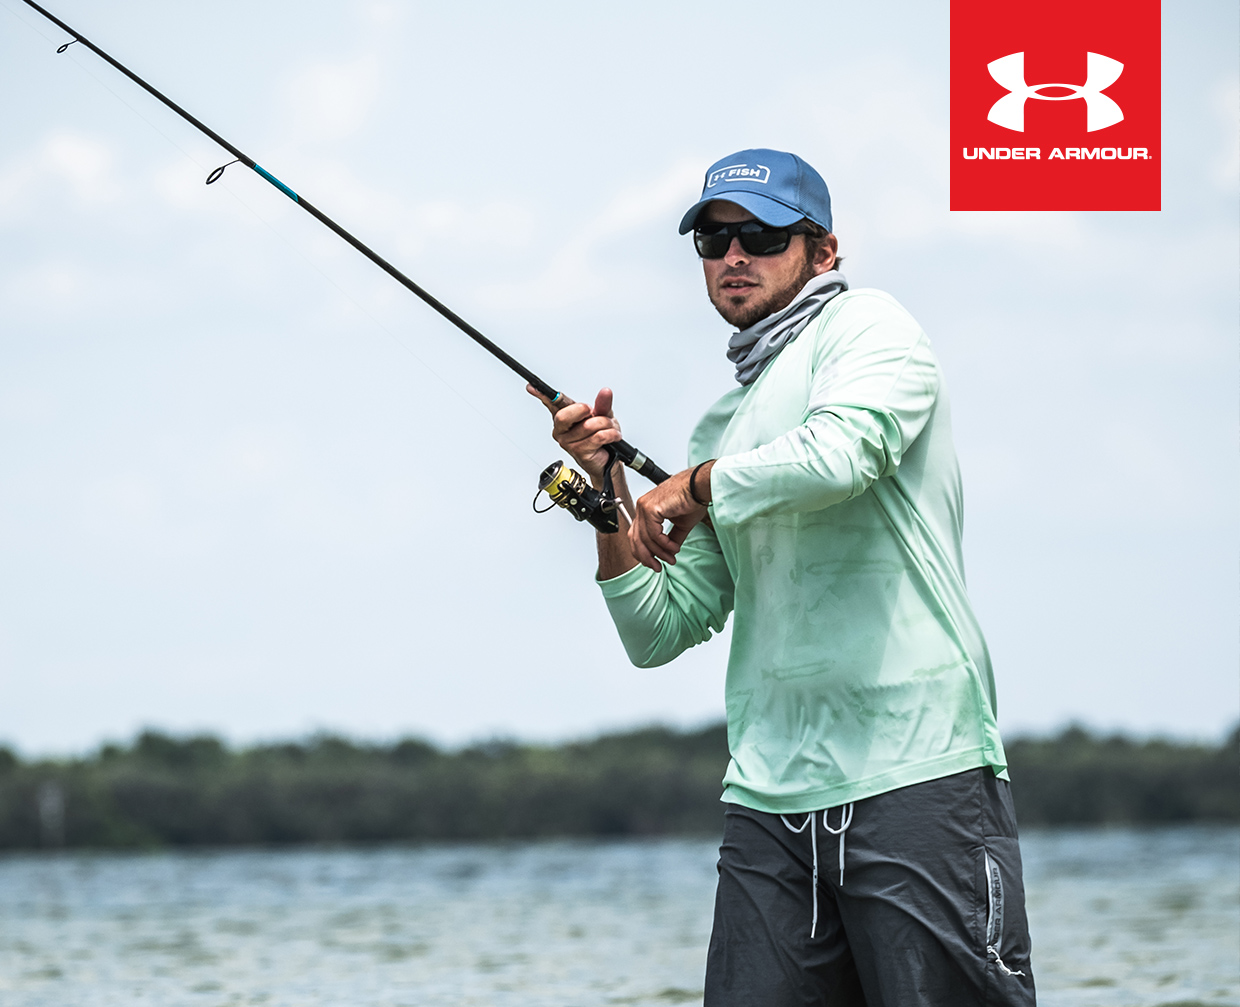 under armour fishing girl